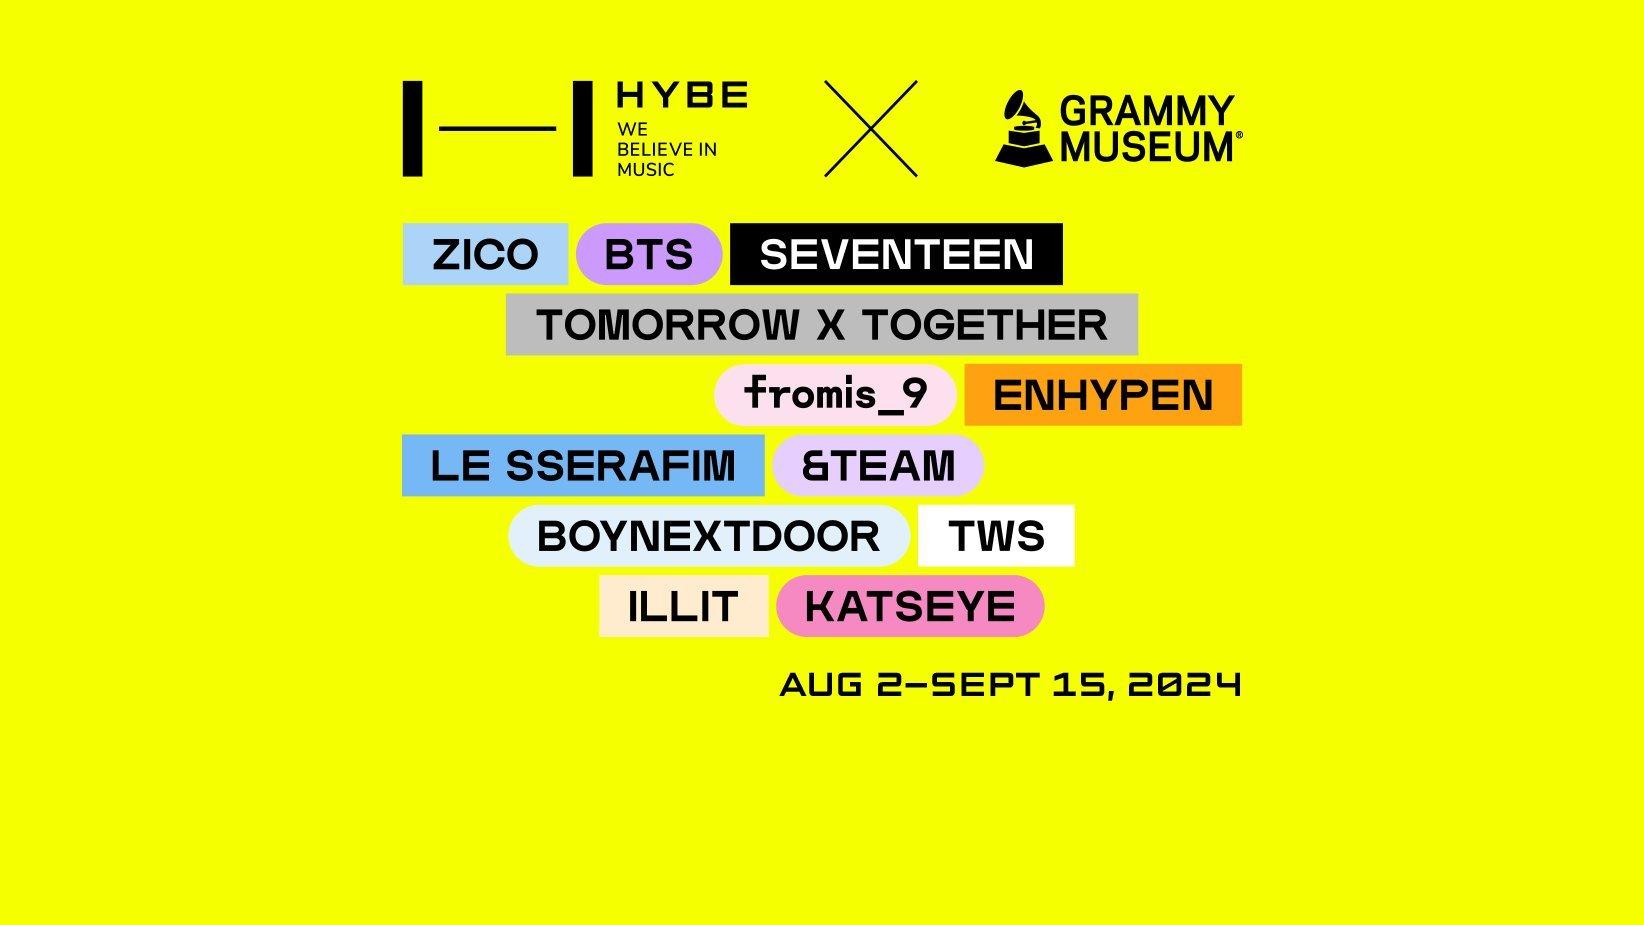 GRAMMY Museum Partners With HYBE For K-Pop Exhibit graphic featuring artist names and exhibit opening date